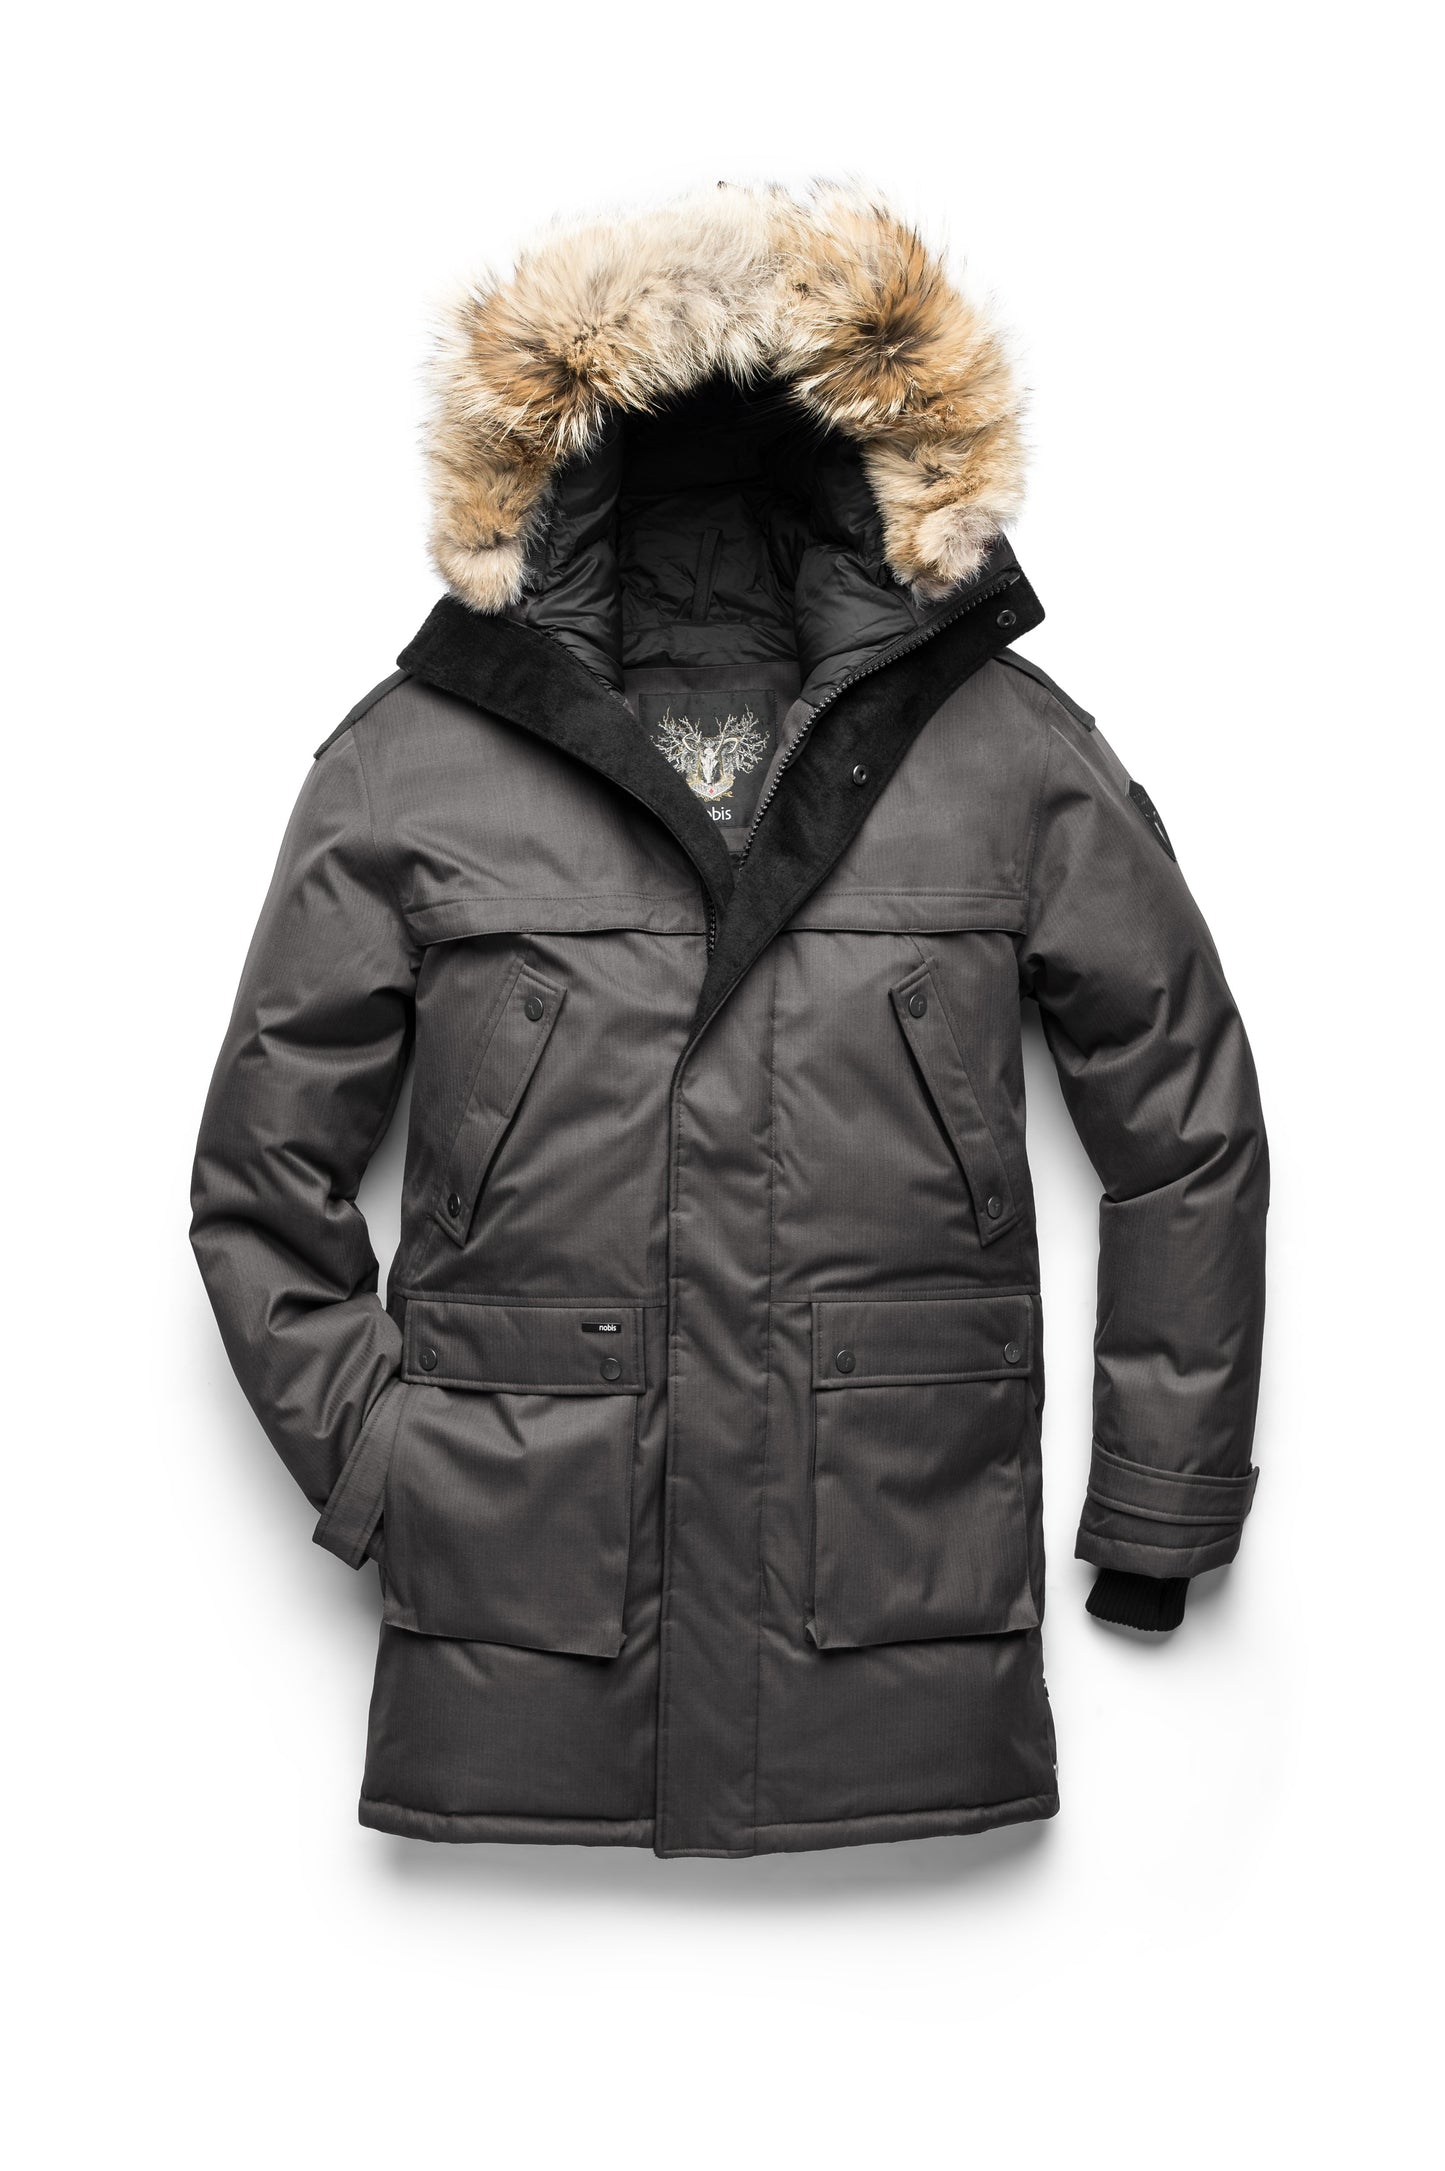 Men's Best Selling Parka the Yatesy is a down filled jacket with a zipper closure and magnetic placket in CH Steel Grey